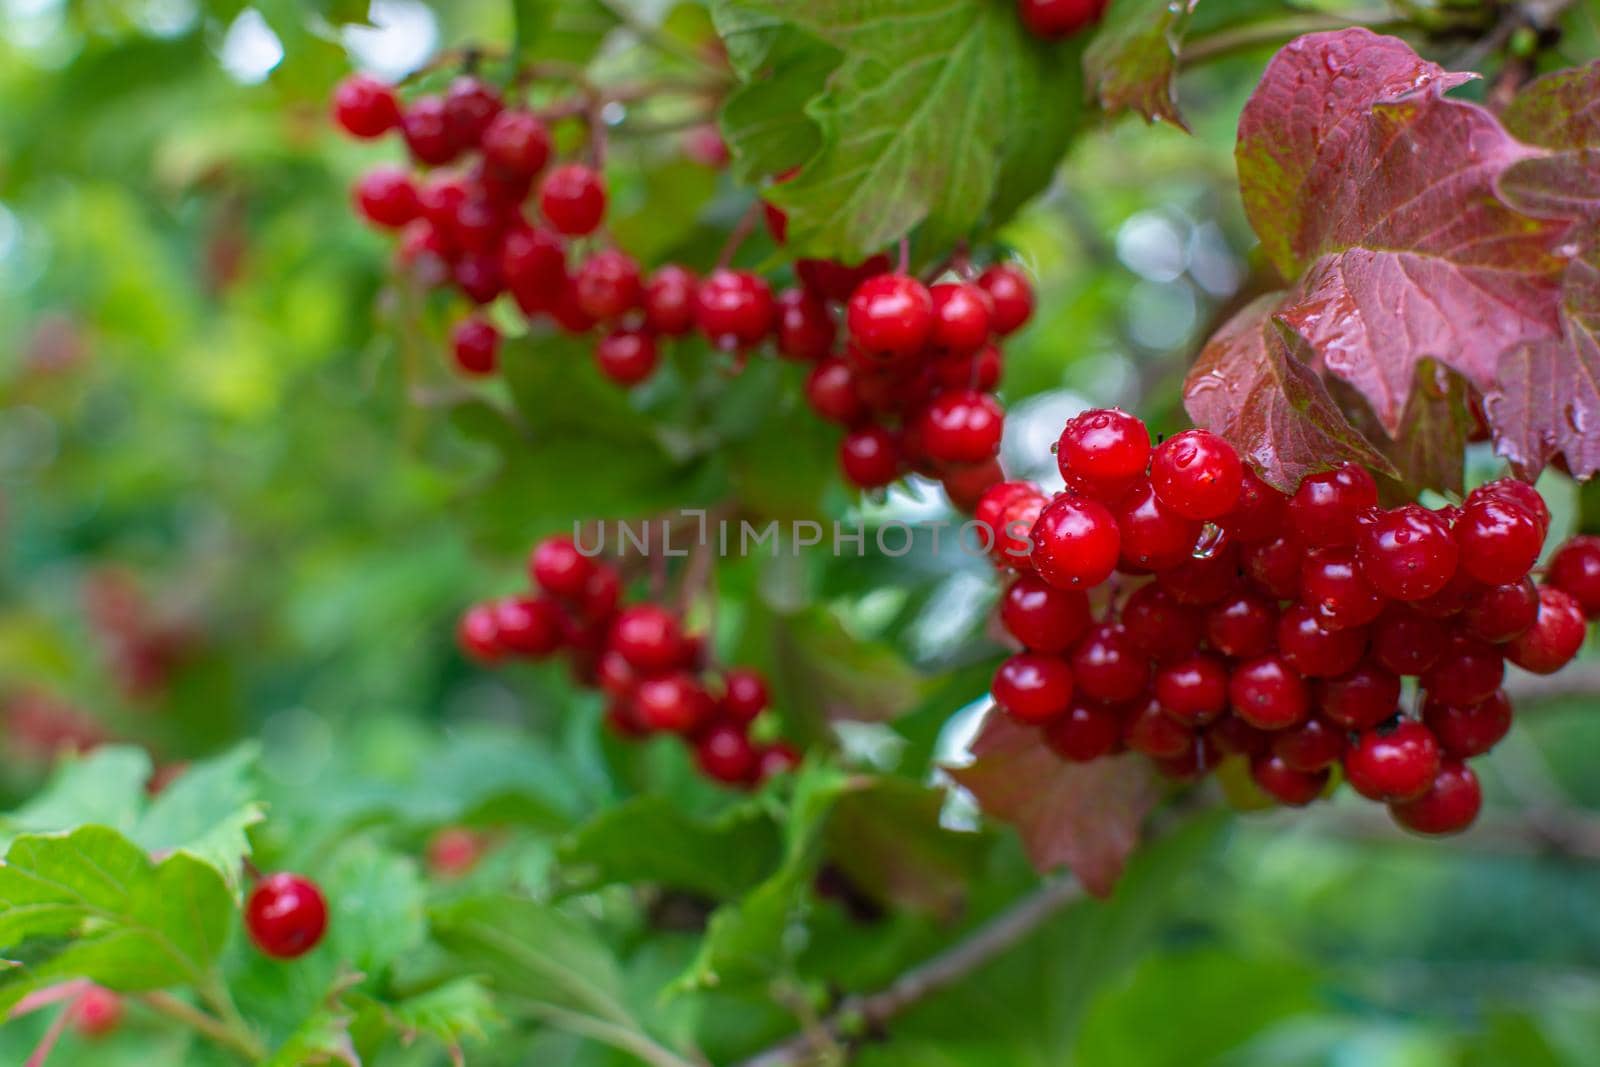 Large grona of red viburnum on a green bush in raindrops